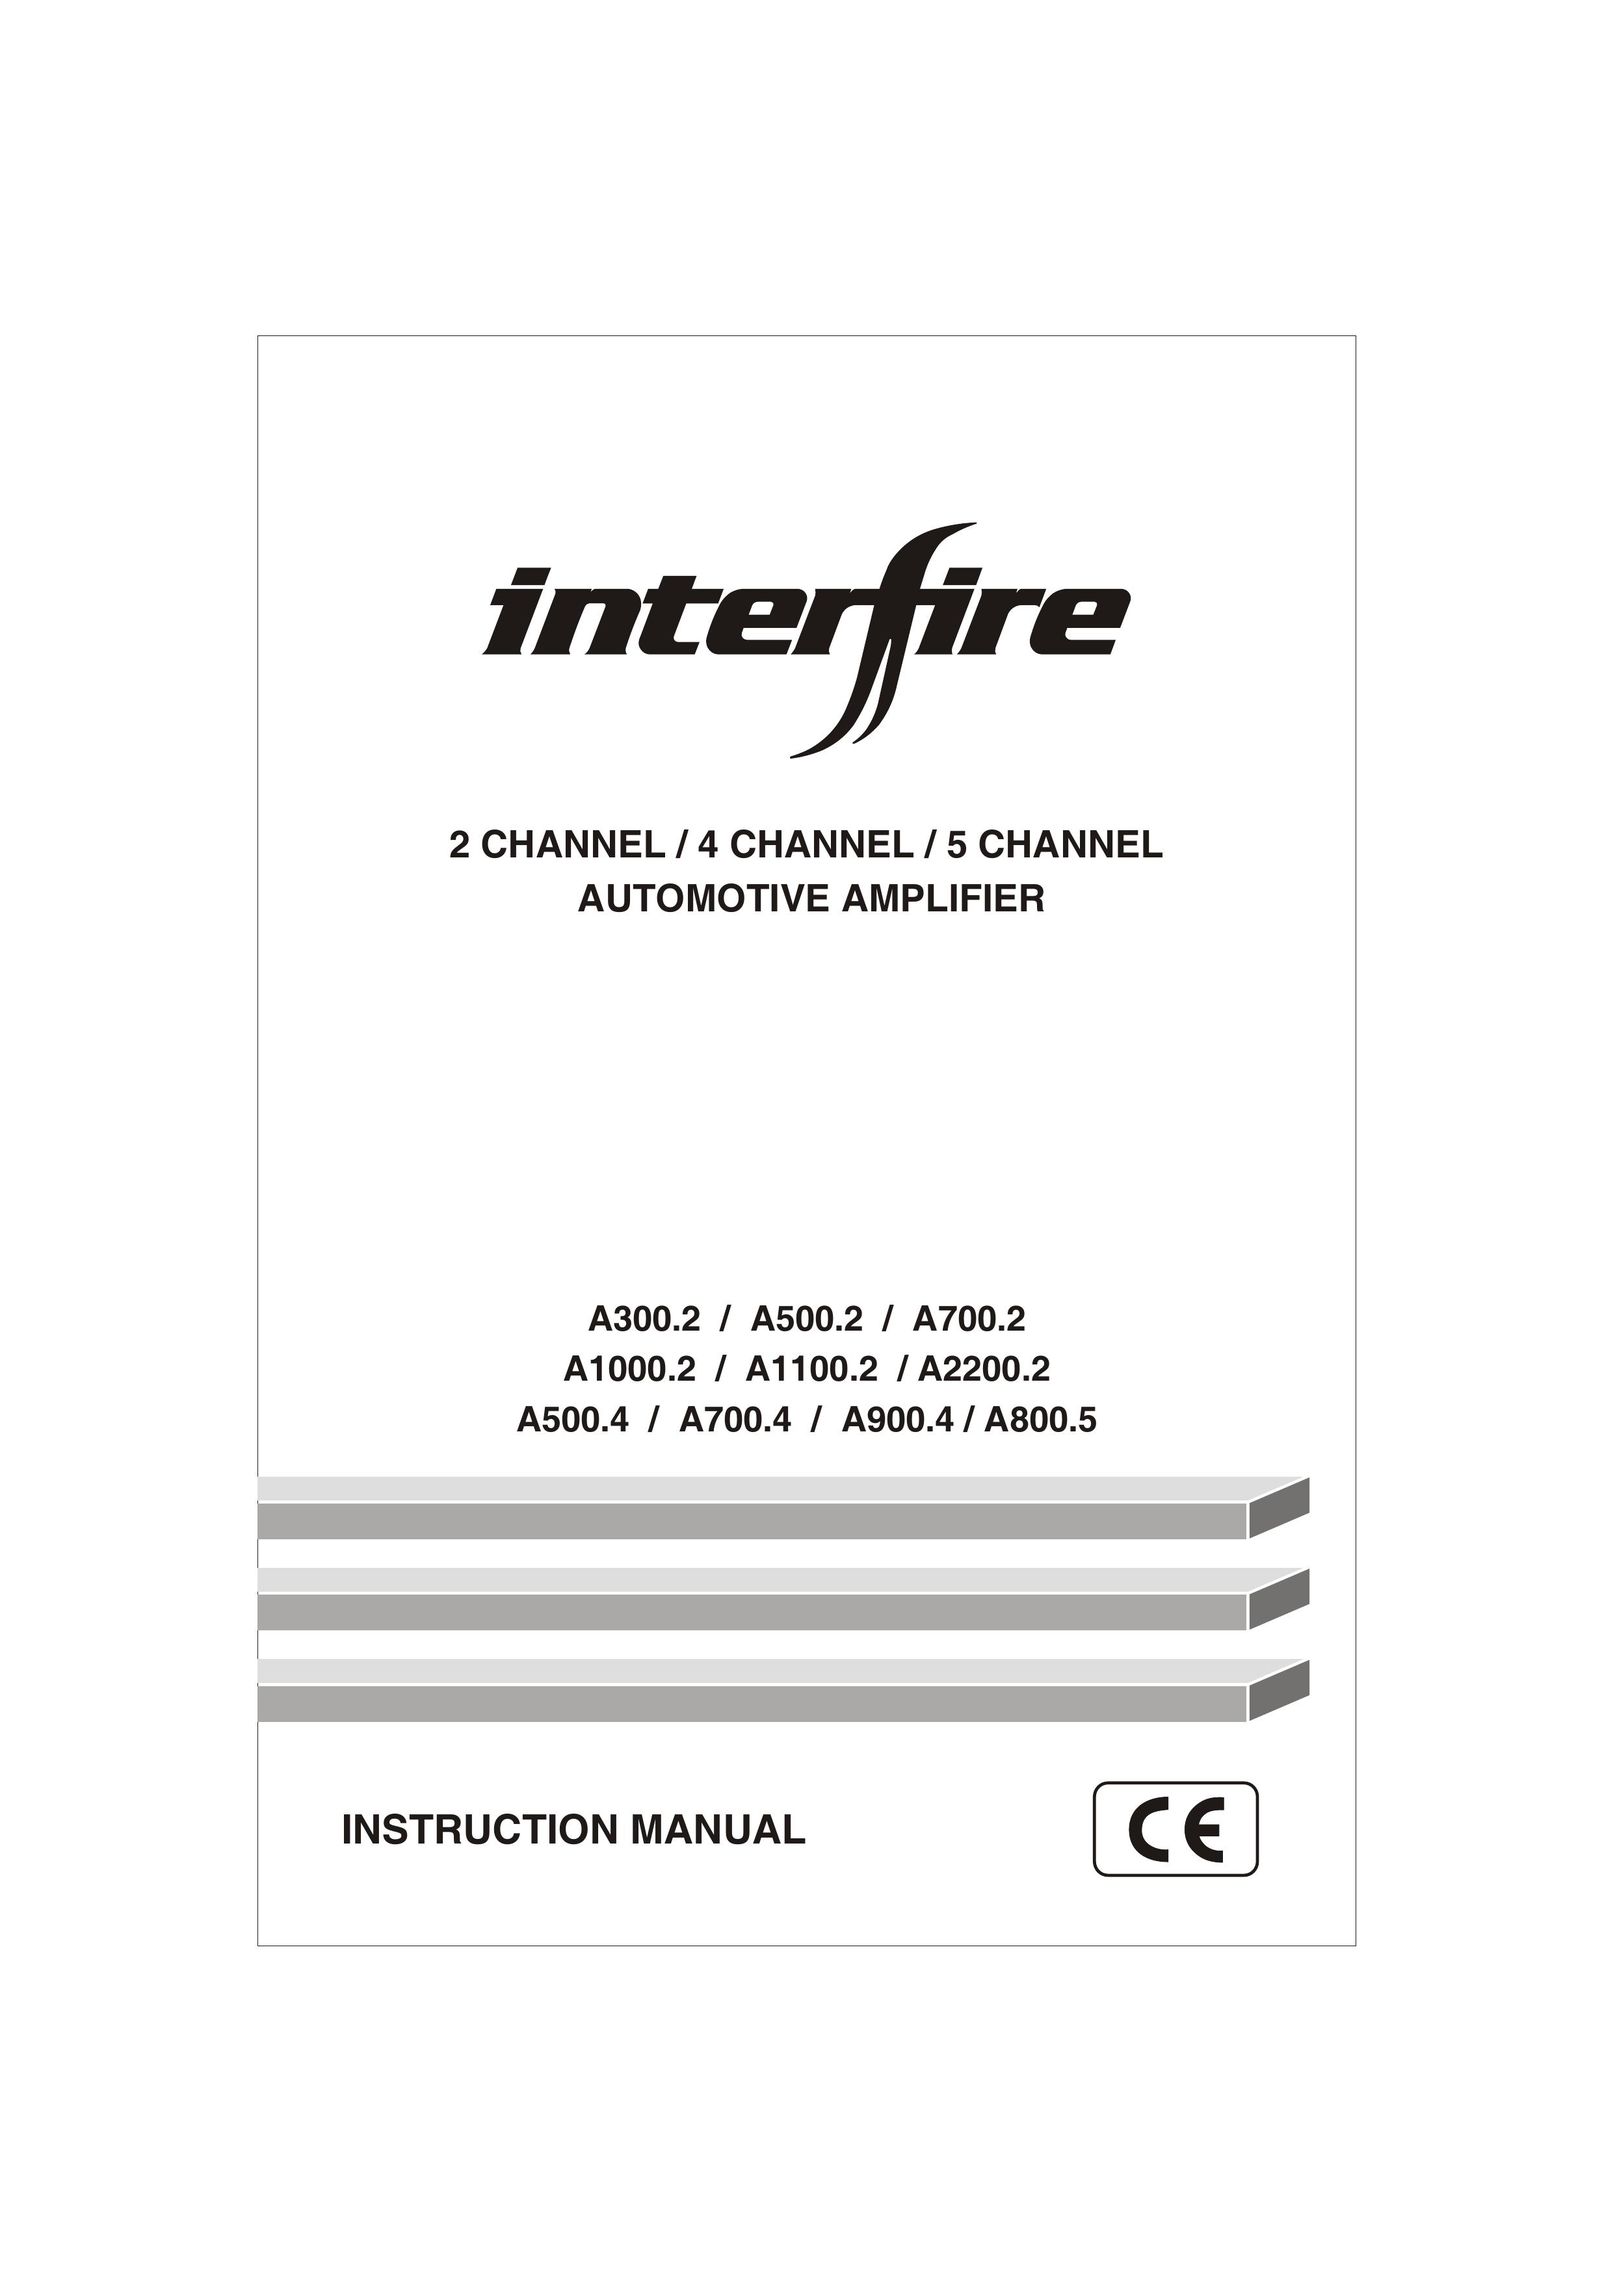 Interfire Audio A800.5 Stereo Amplifier User Manual